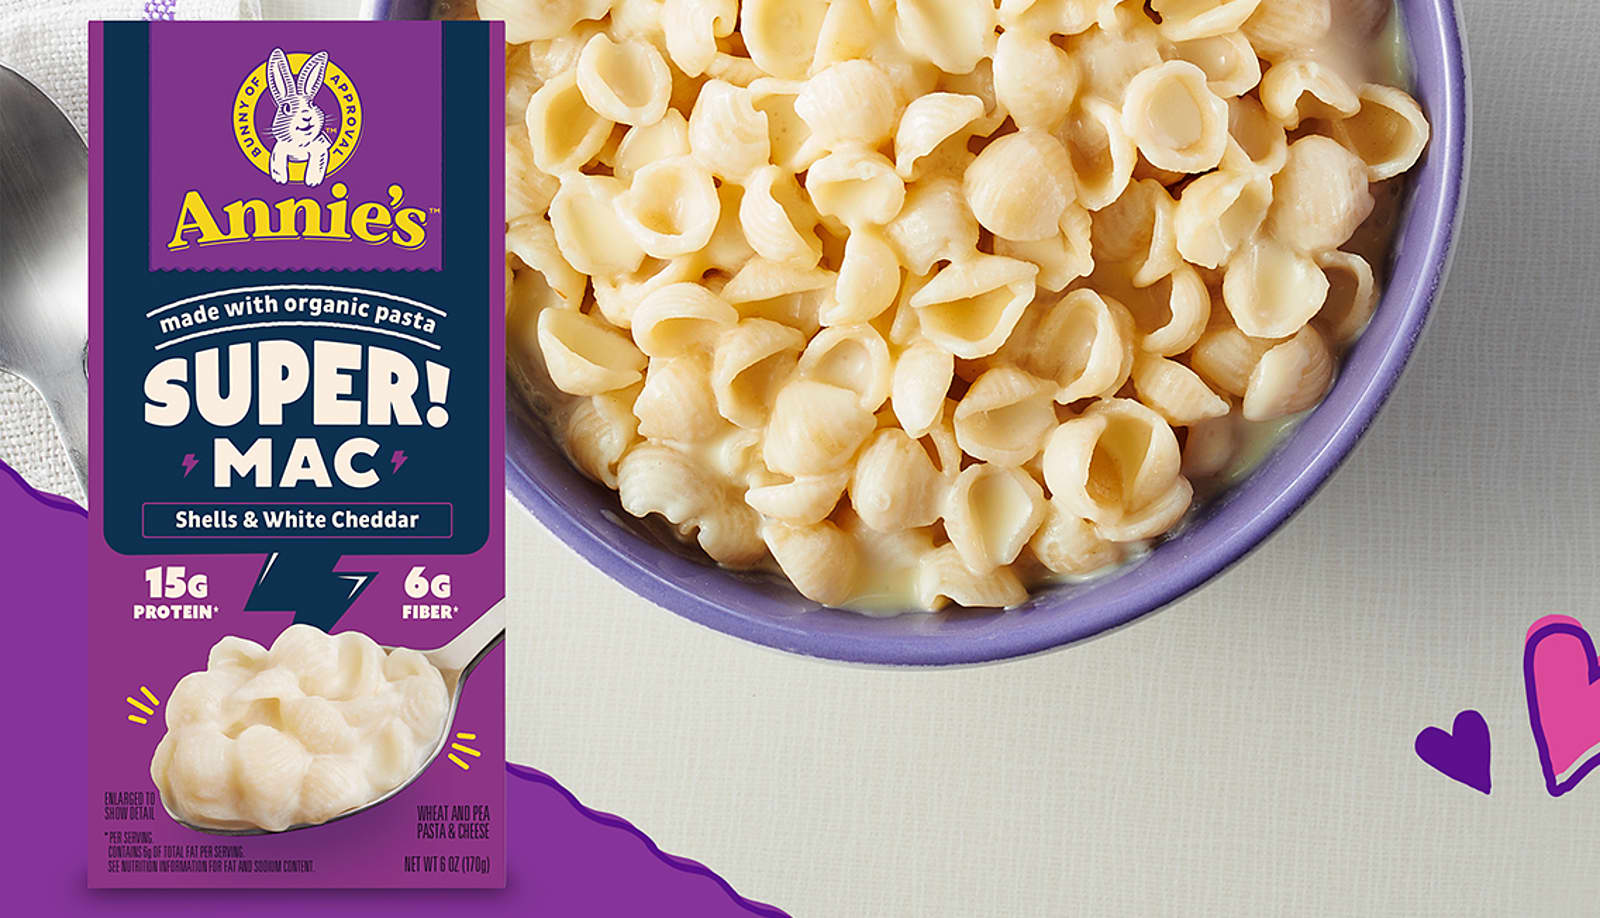 Box of Annie's Super! Mac next to a bowl of macaroni and cheese